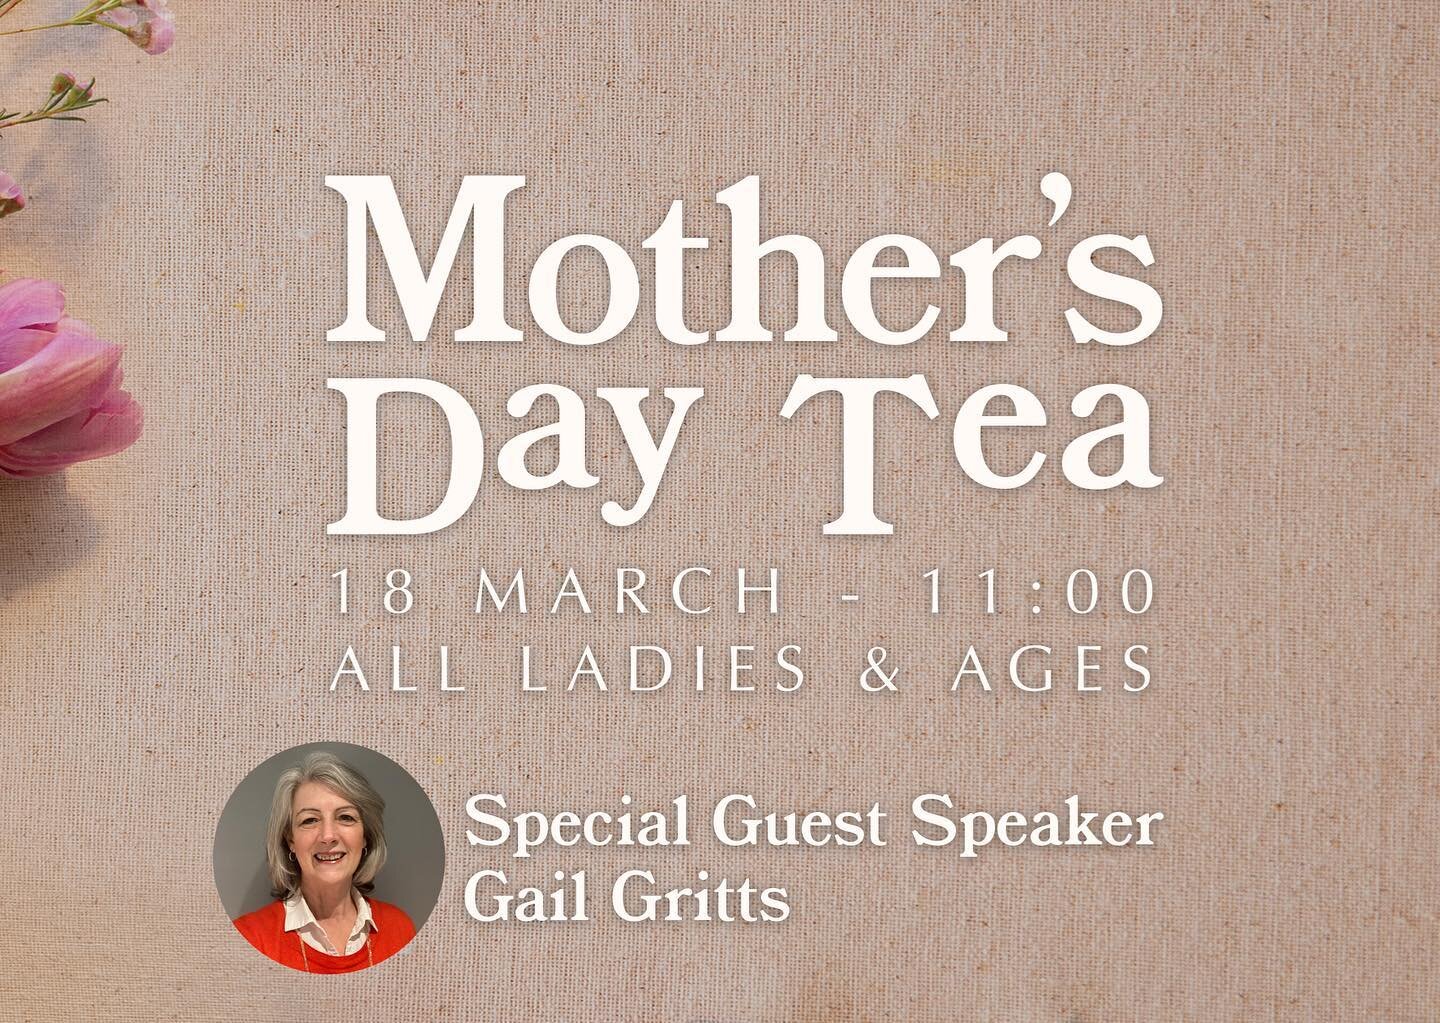 Just over a week to go until our Mother&rsquo;s Day Afternoon Tea next Saturday!! 💕🌸

Please message Jassen to let her know you&rsquo;ll be coming if you haven&rsquo;t done so already! All ladies of any age are welcome ☺️

We are excited for this a